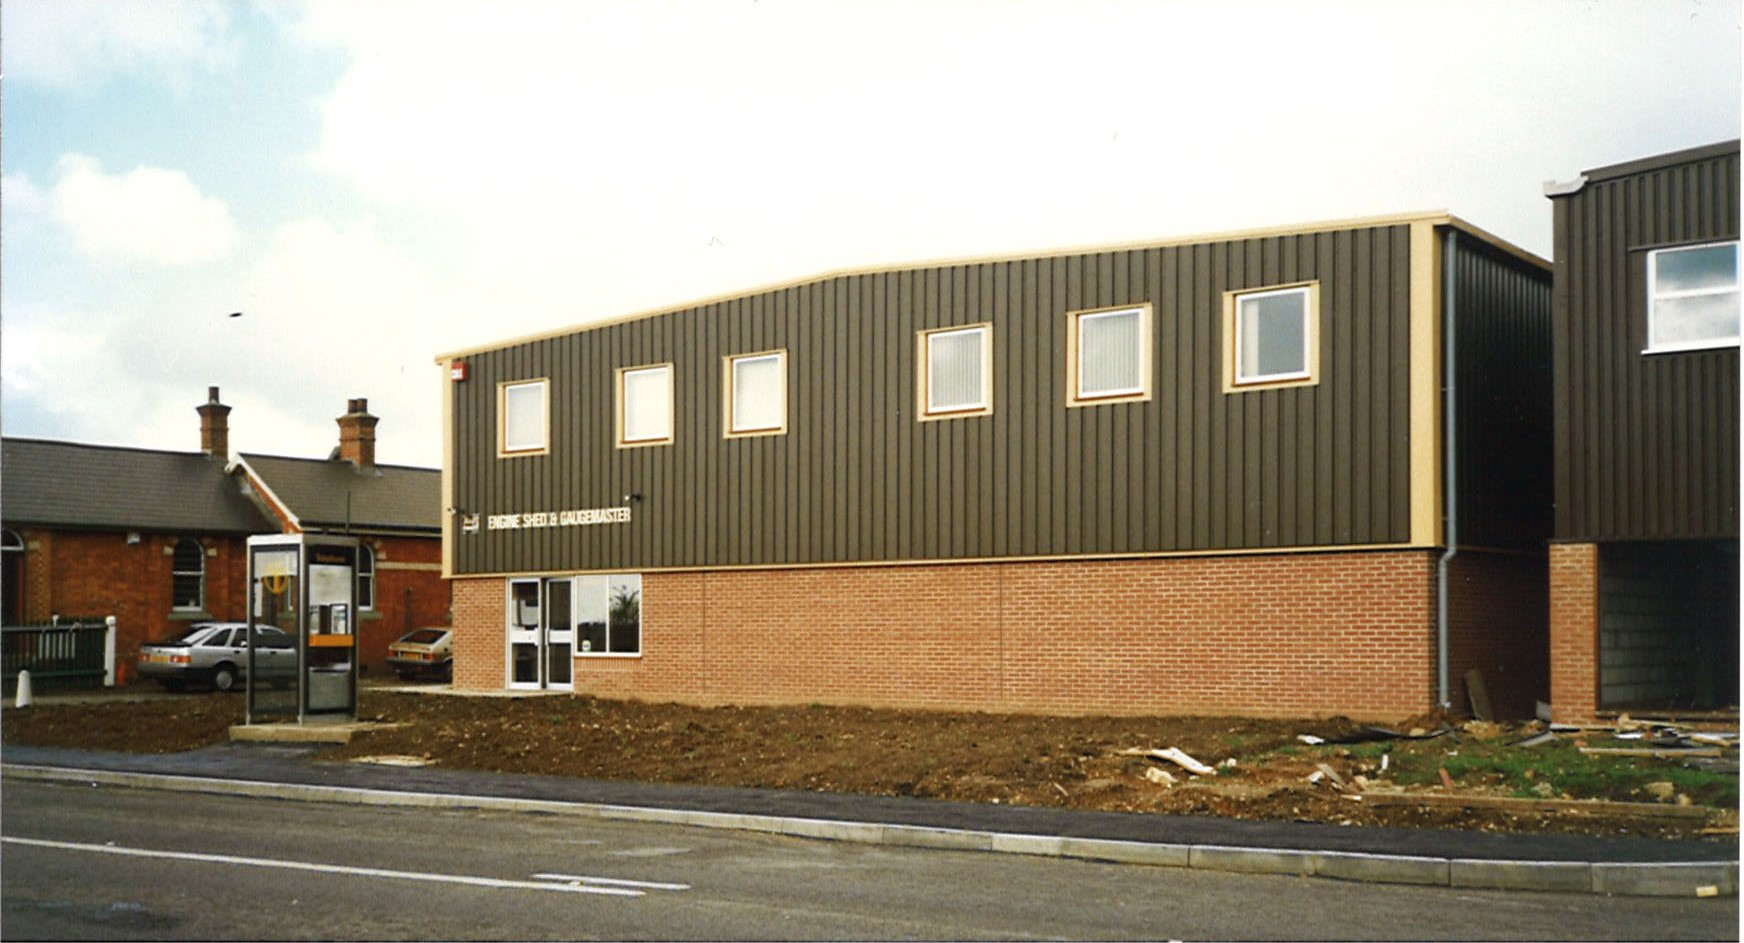 Gaugemaster House just after completion in March 1989.